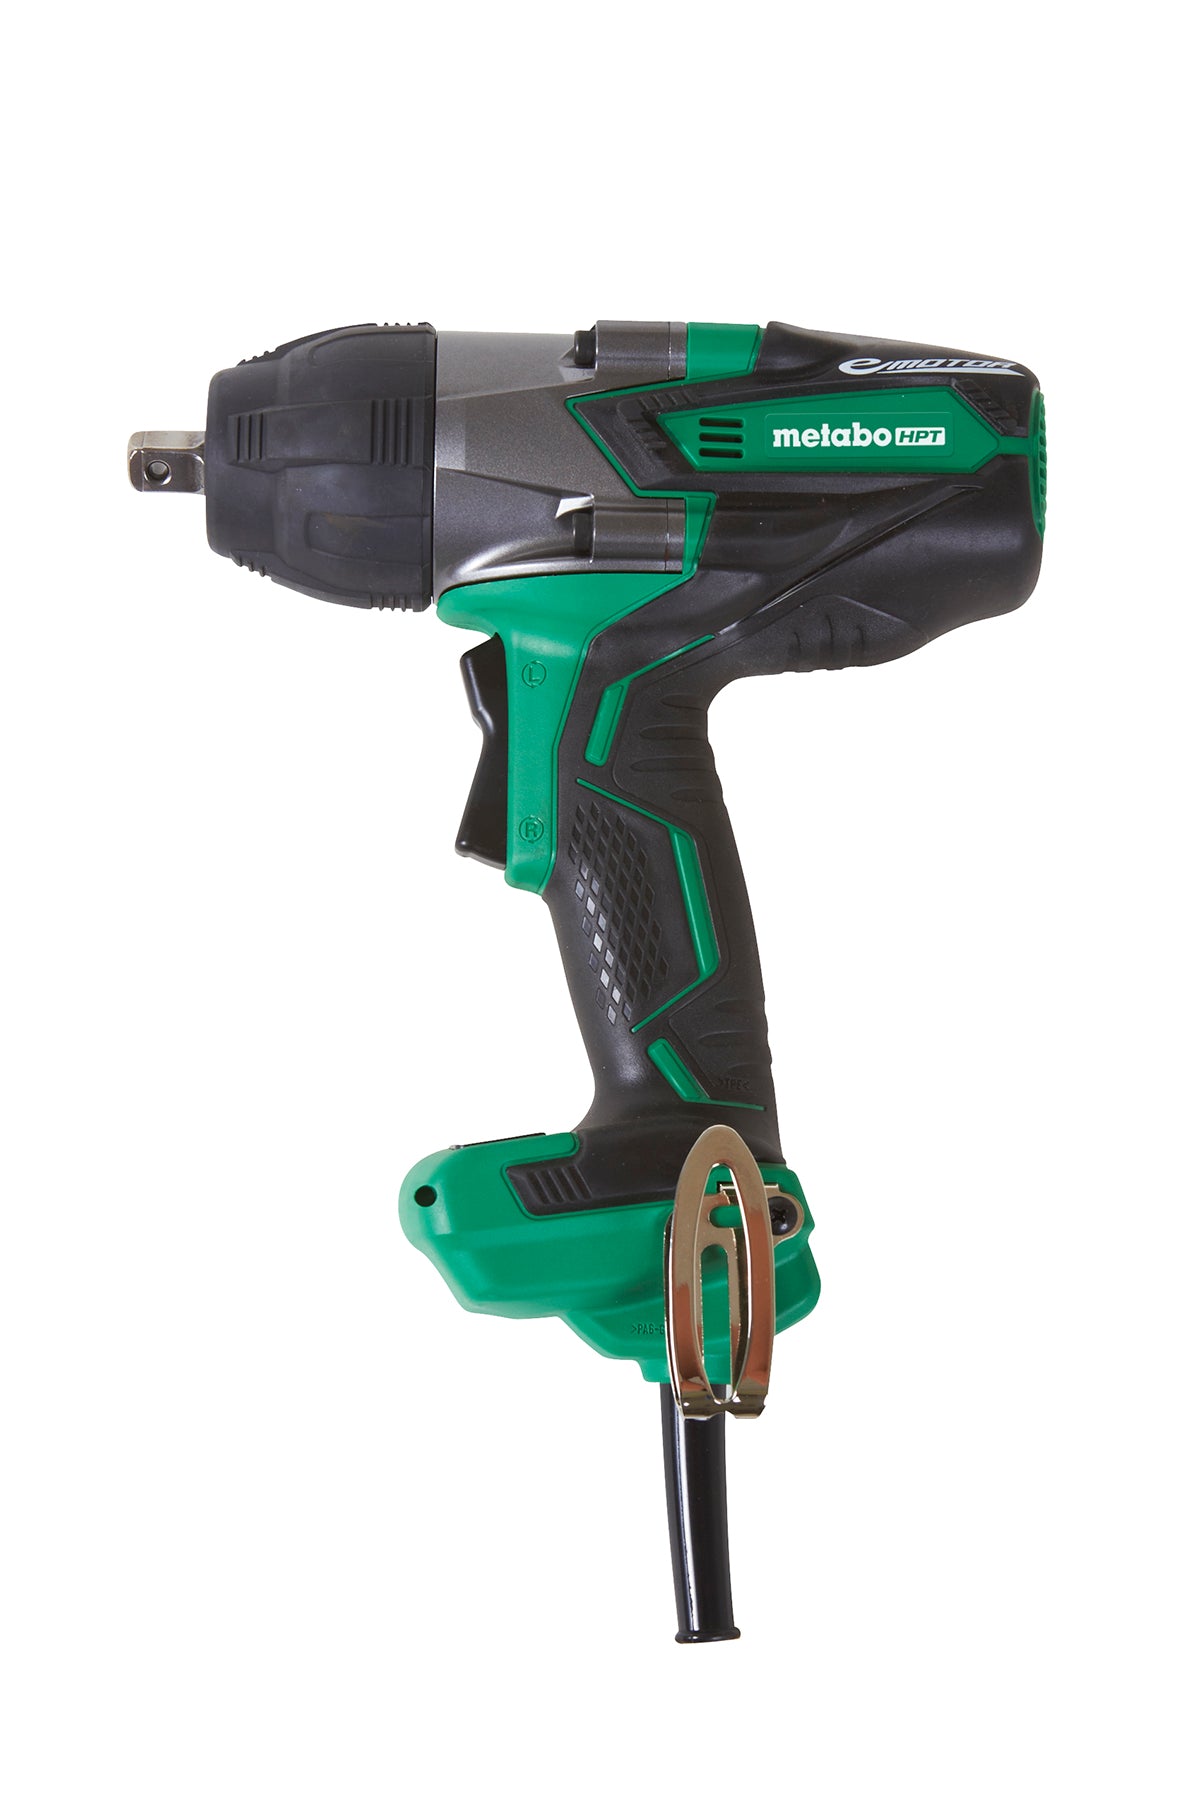 1/2 Inch Square Drive AC Brushless Impact Wrench | WR16SE-WR16SEM